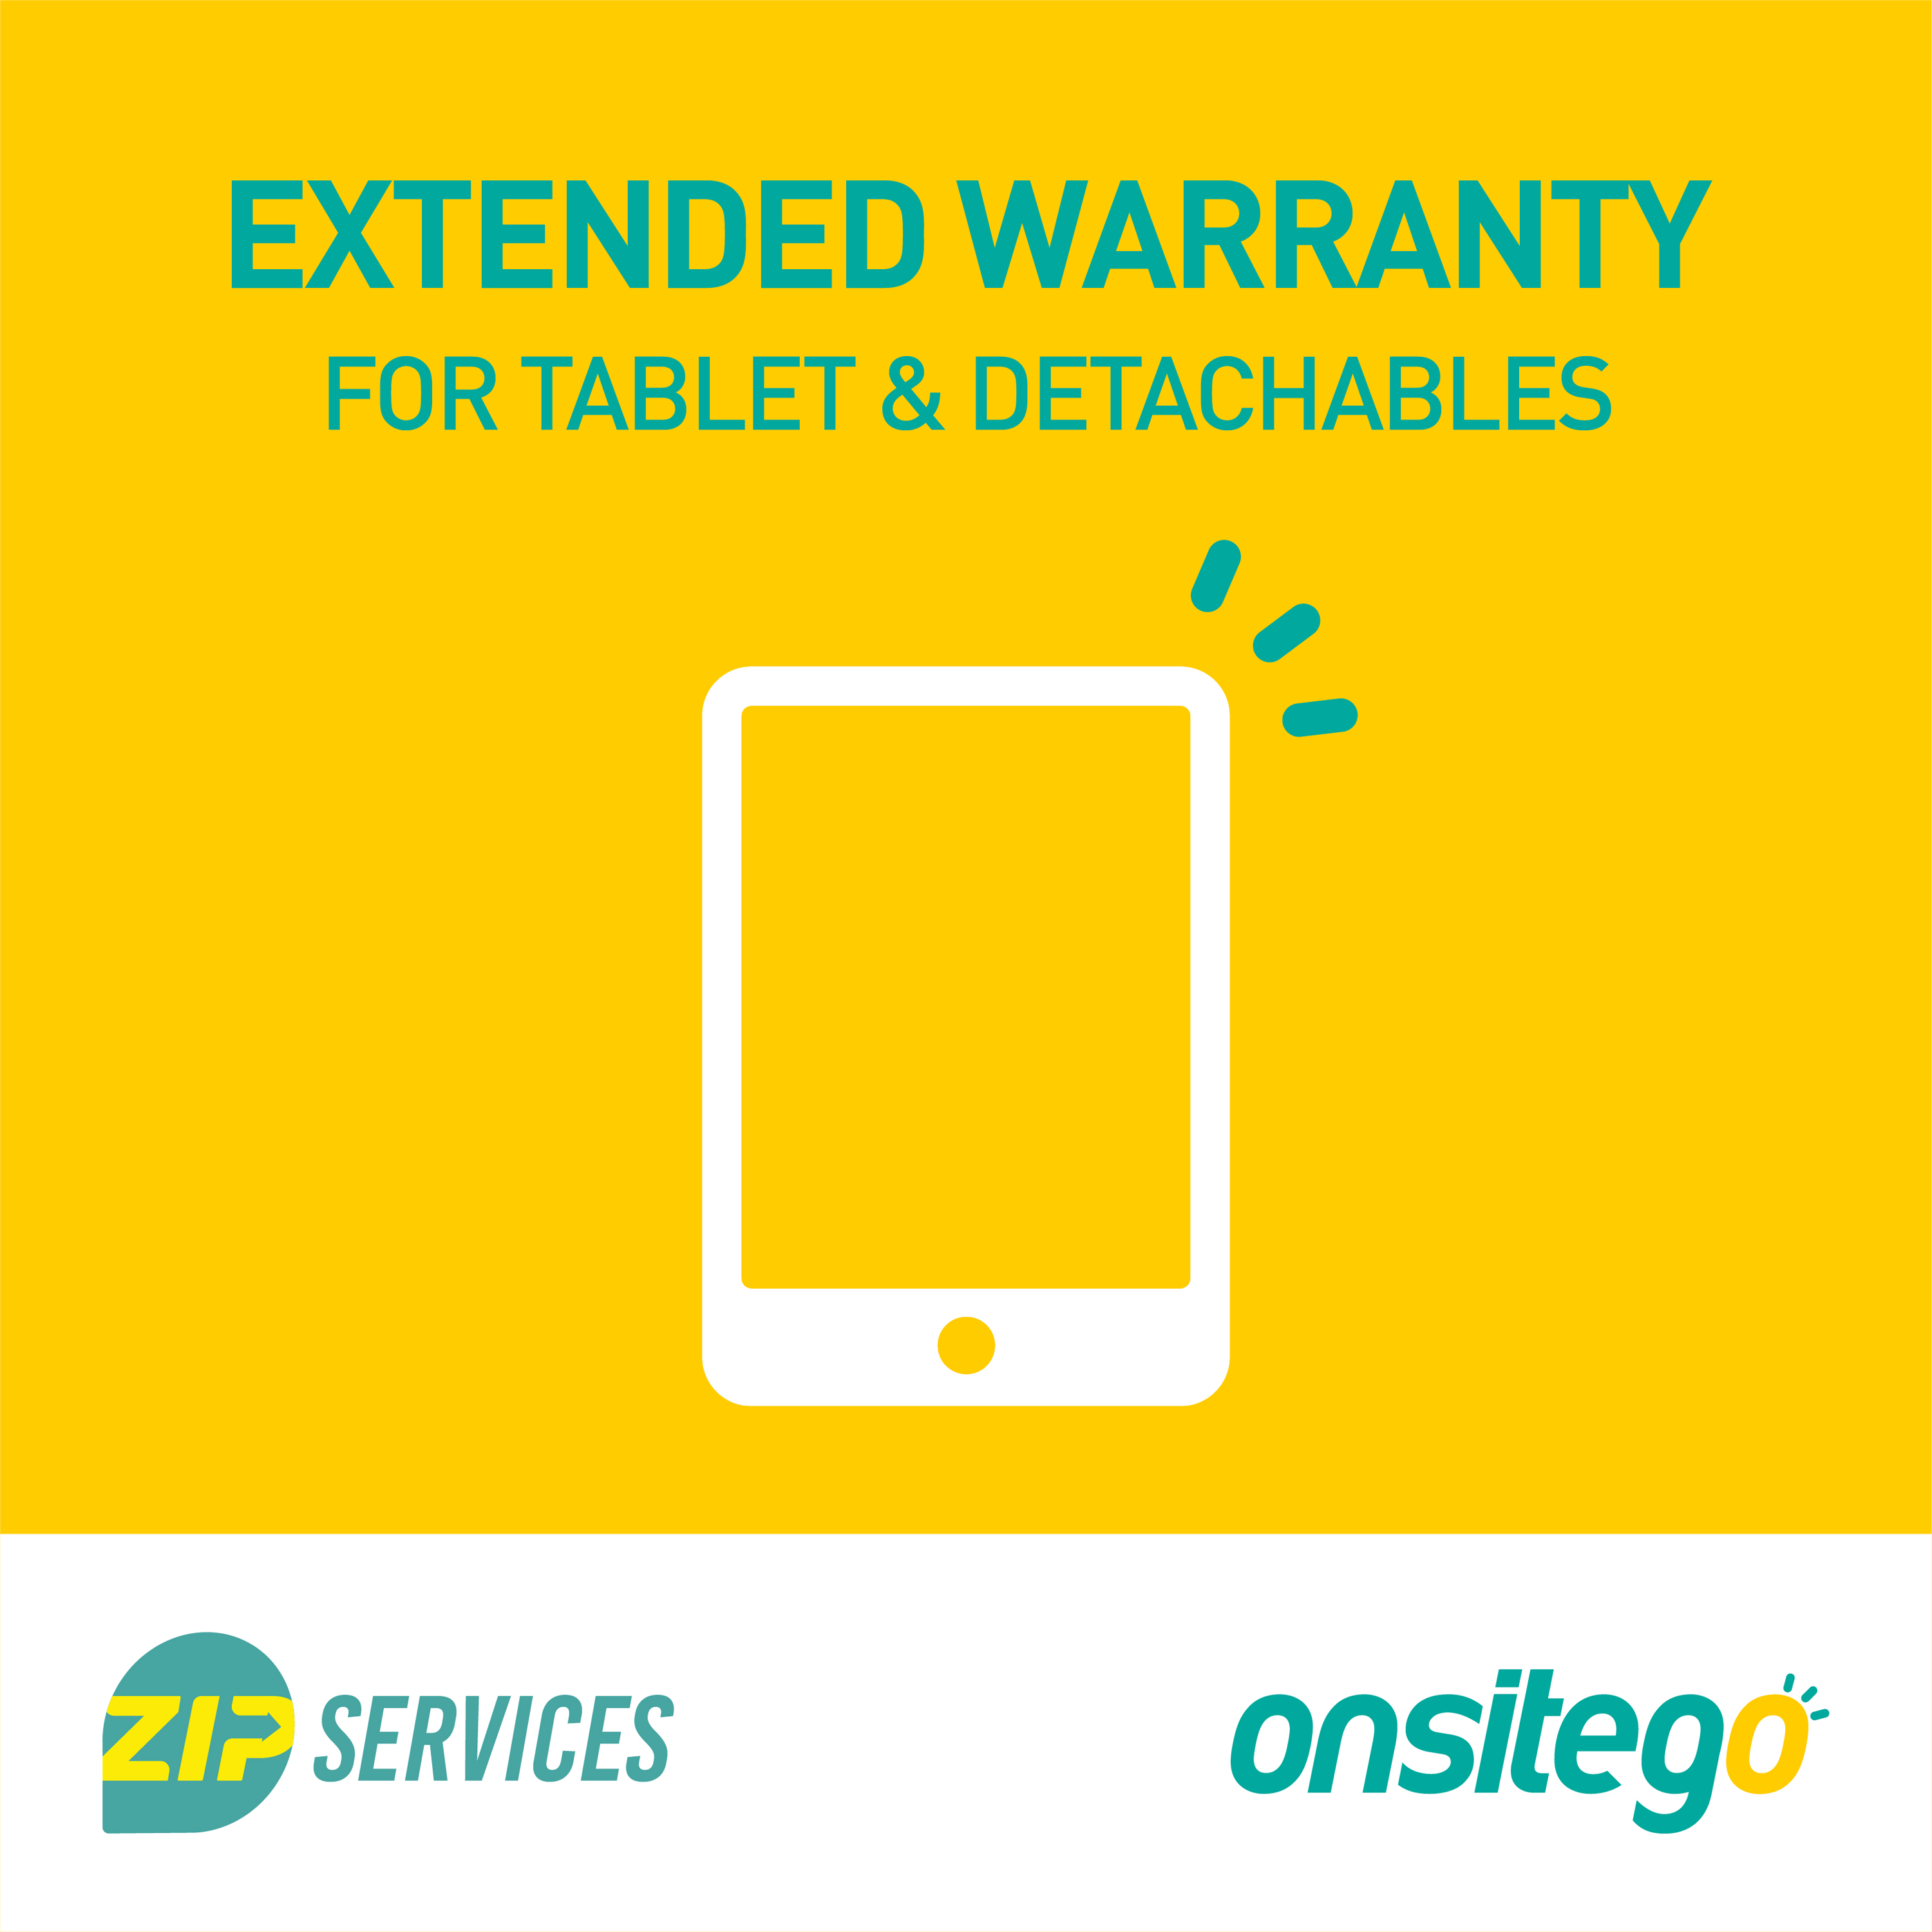 Onsitego 3 Months Extended Warranty for Tablets Rs.160001 - Rs.165000_1